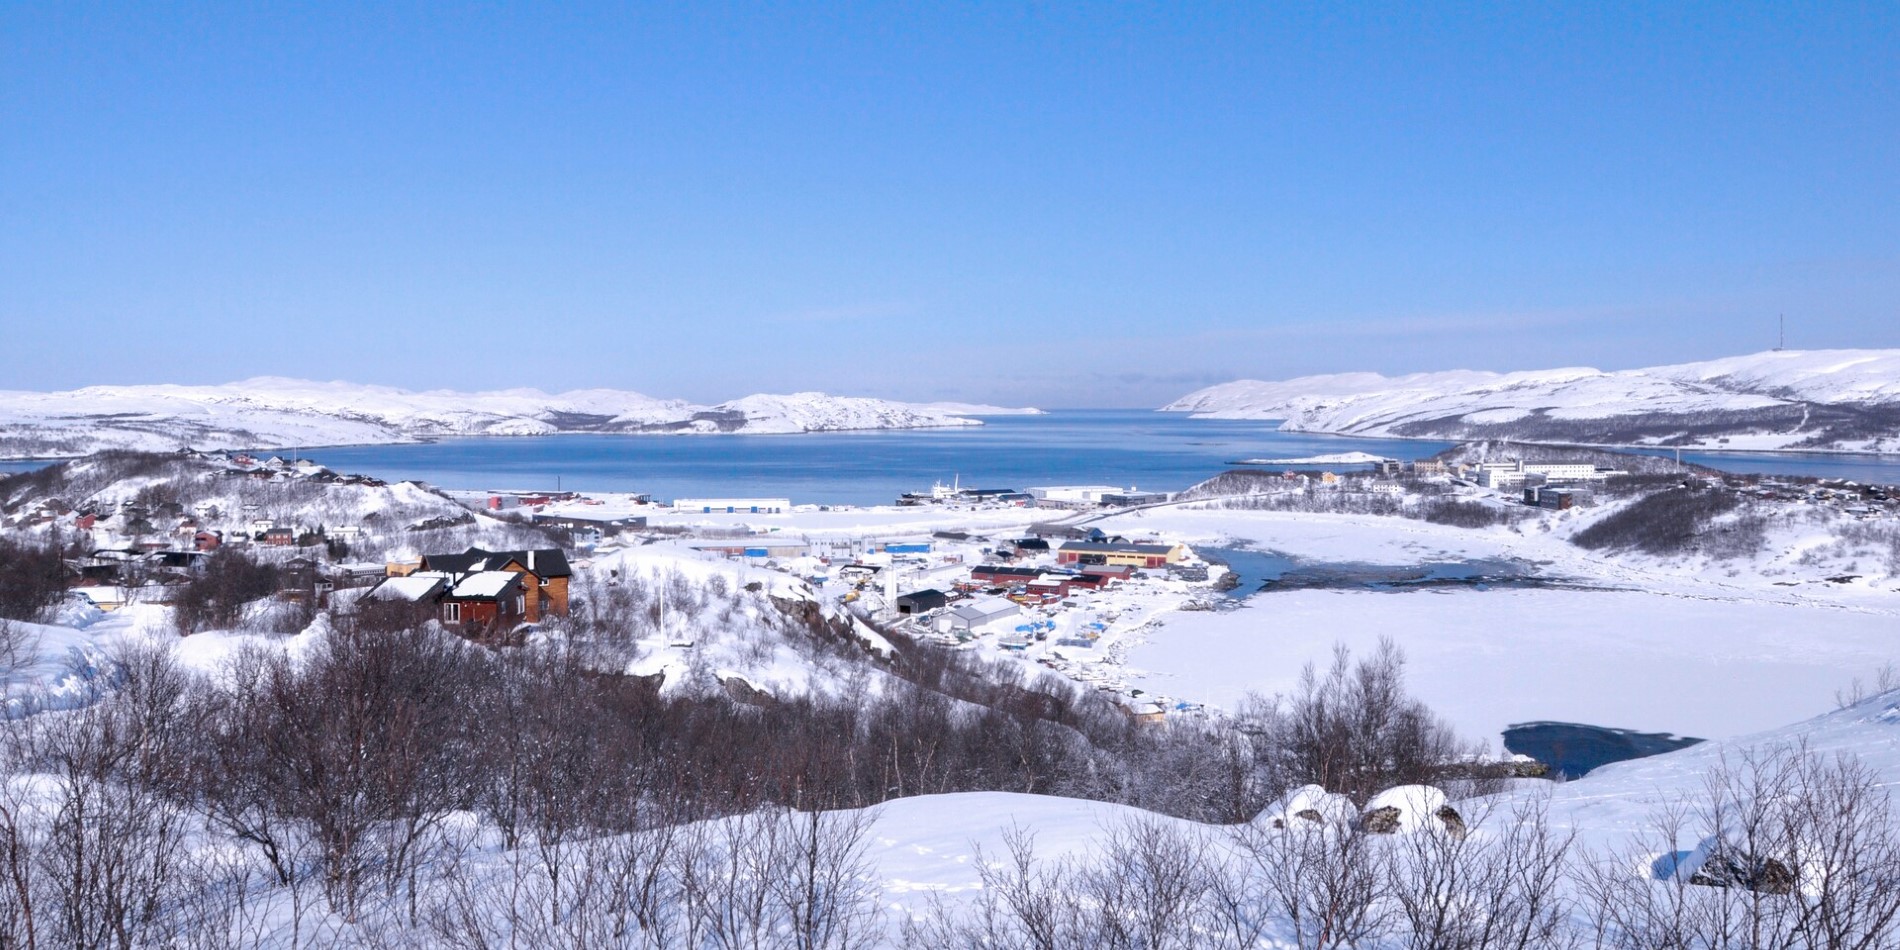 Snow over the port town of Kirkenes in Norway on the Russian border